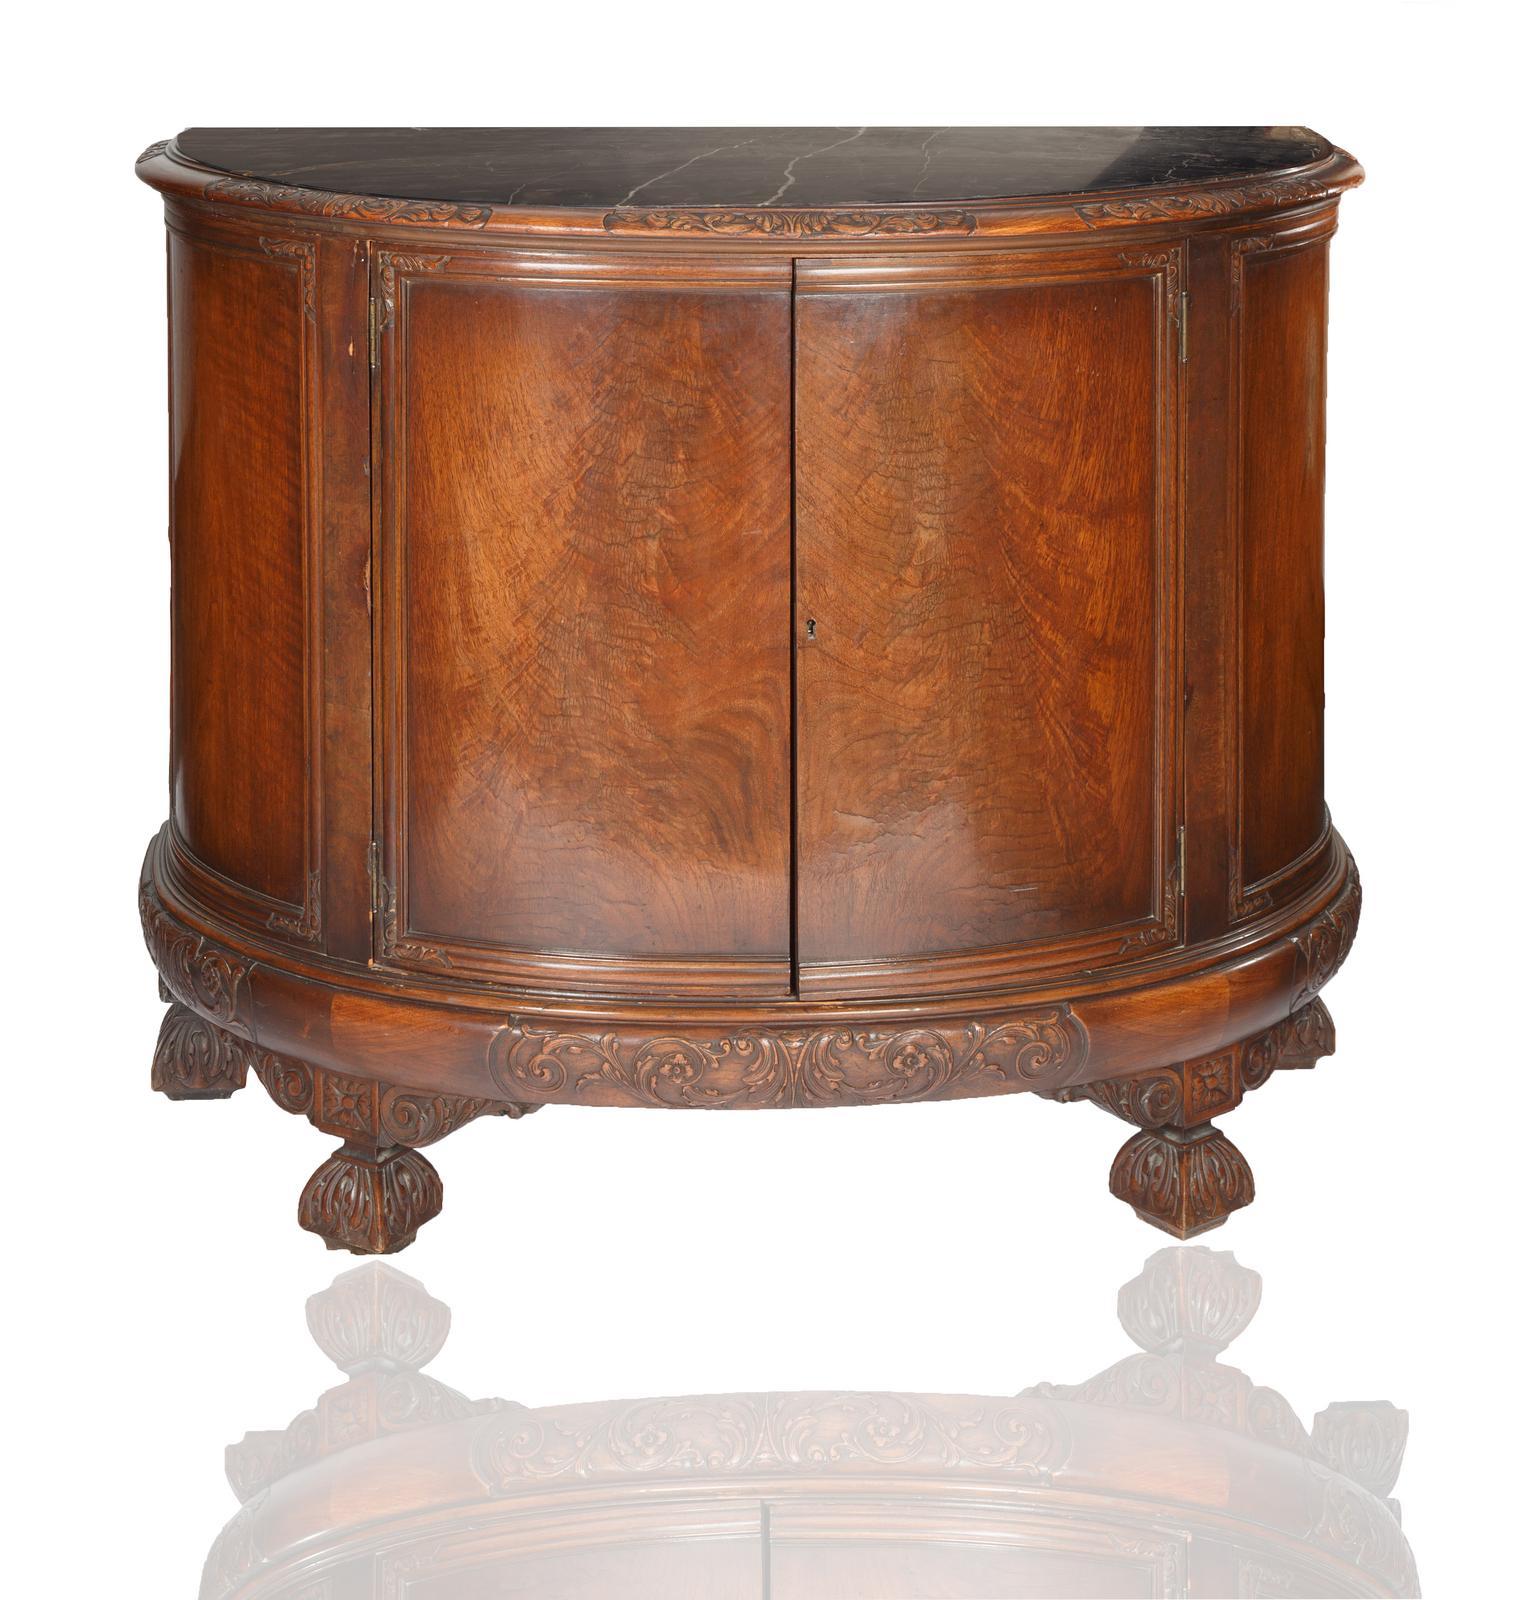 French Mahogany Wood Demilune Shape Marble Inserted Top Sideboard / Server For Sale 5